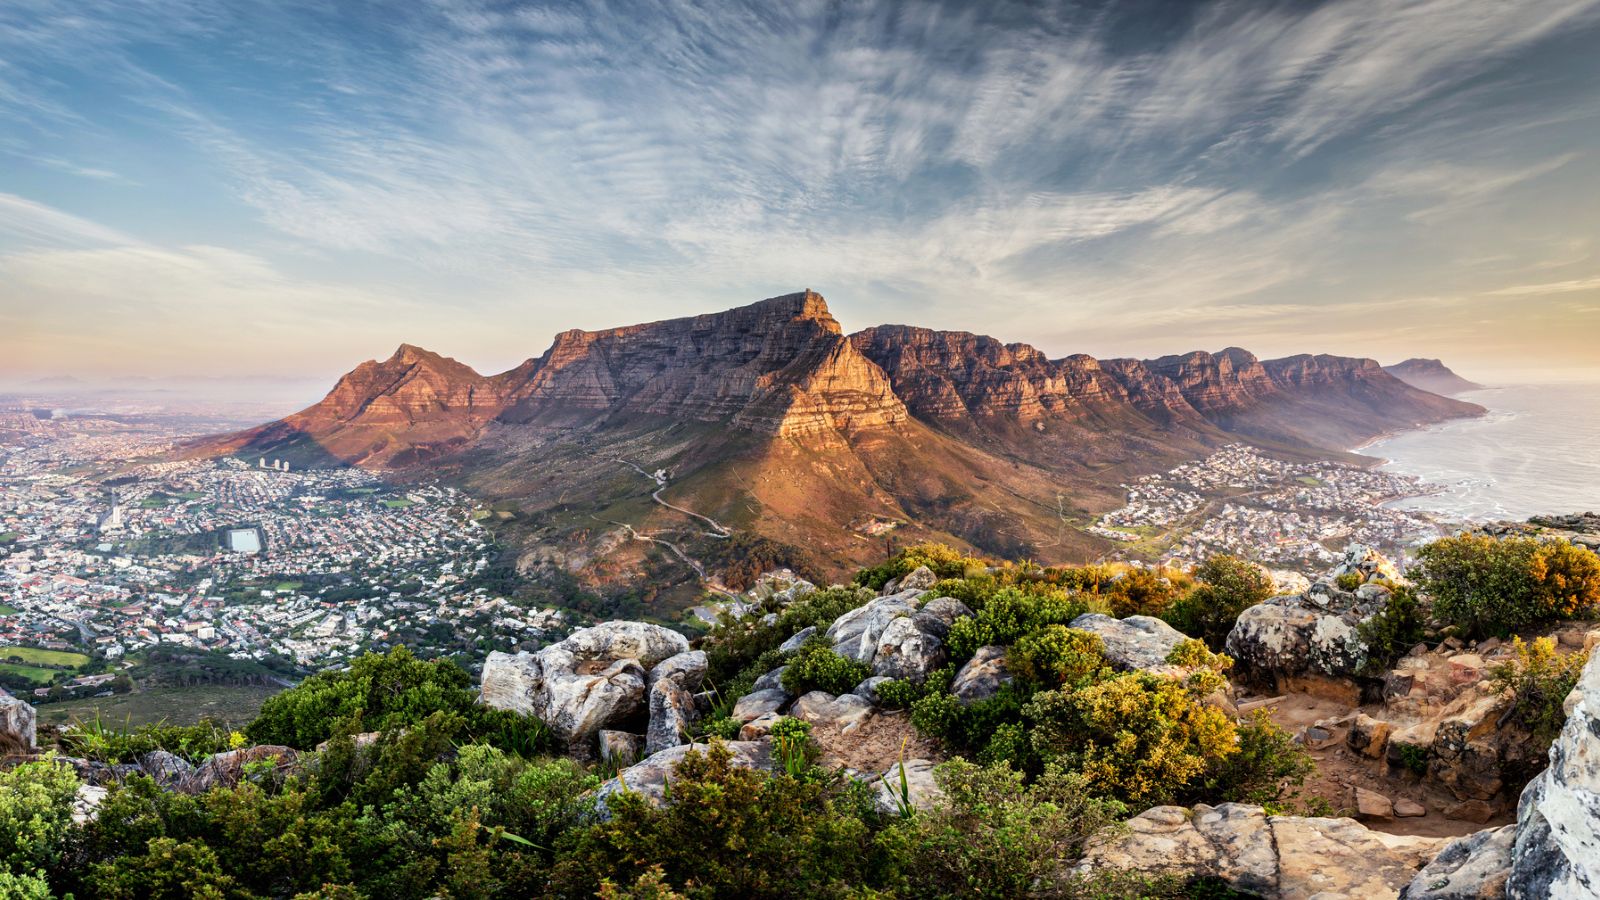 <p>Positioned between mountains and sea, Cape Town offers diverse adventures, from shark cage diving in Gansbaai to paragliding off Lion’s Head. </p><p>Hiking Table Mountain provides breathtaking views, while a short drive away, the Cape Winelands offer cycling tours amidst rolling vineyards. Safari tours to nearby game reserves offer encounters with Africa’s Big Five.</p>